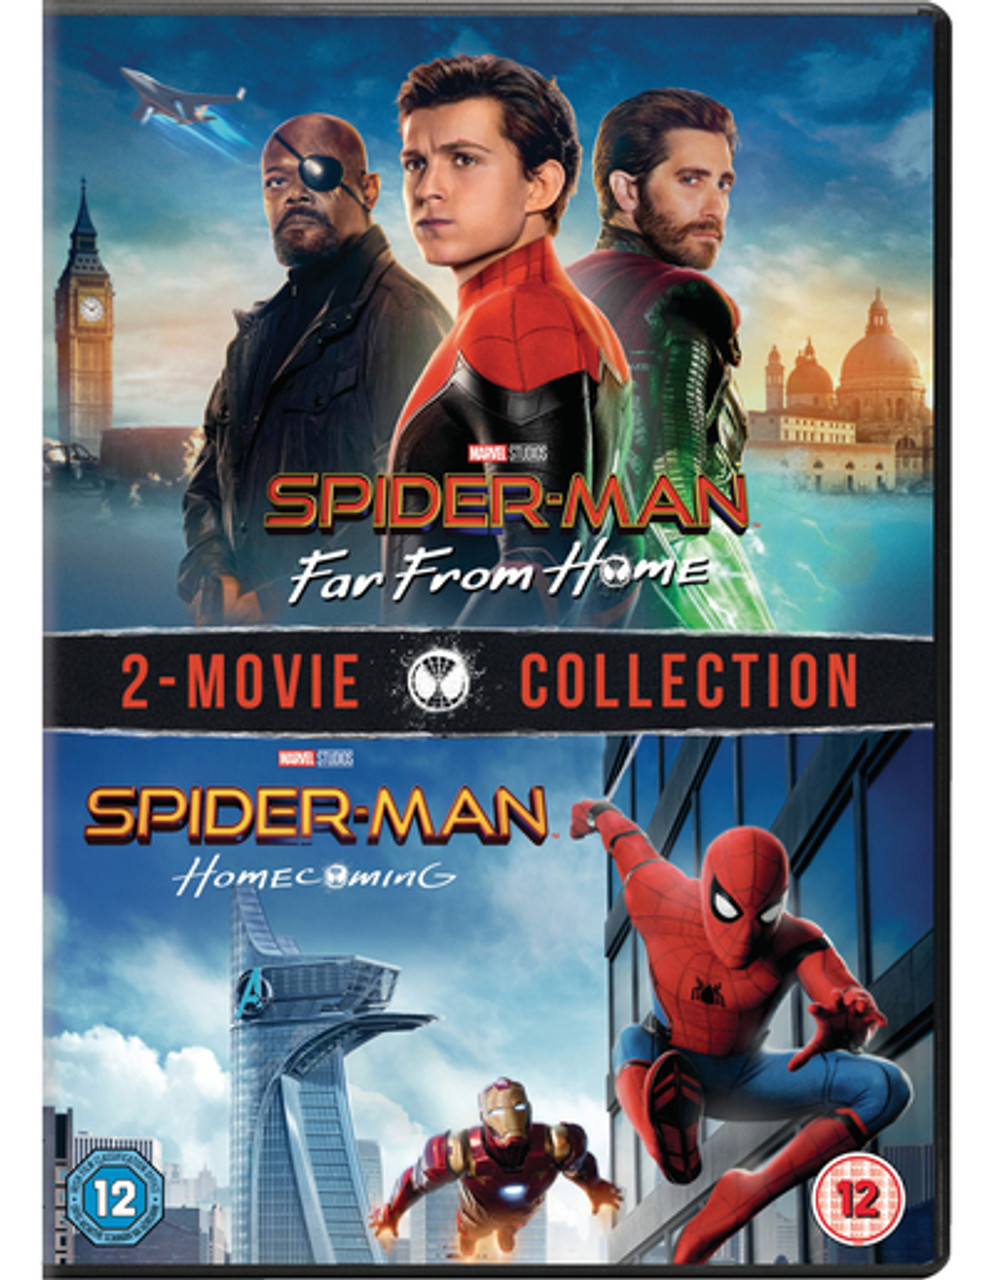 Spider-Man Homecoming (DVD)